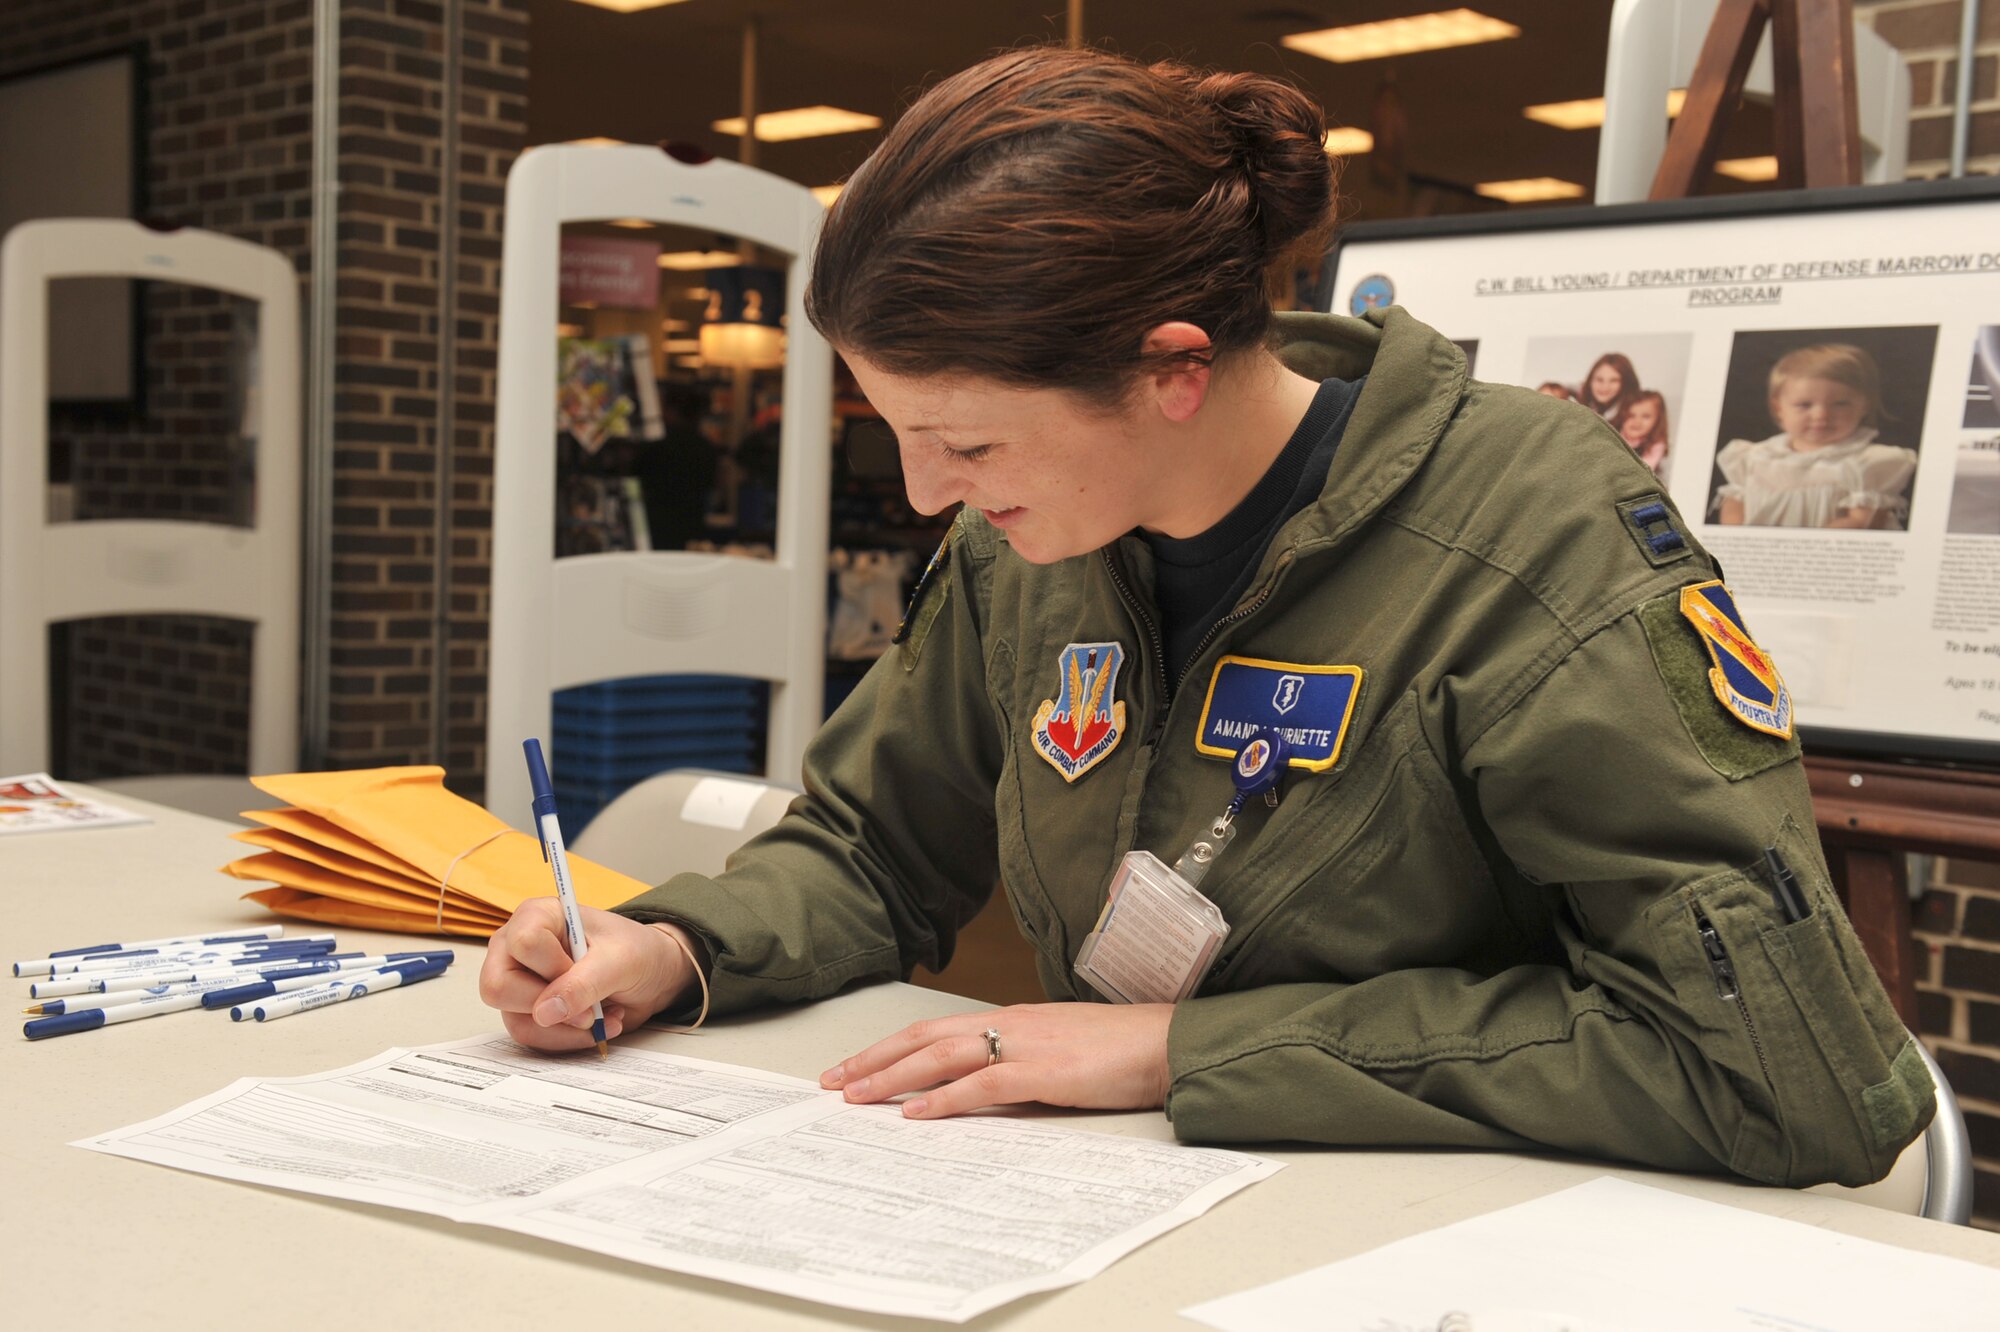 Capt. Amanda Burnette approves an applicant bone marrow consent form during a bone marrow drive at Seymour Johnson Air Force Base, N.C., Sept. 30, 2011. Representatives have to sign off consent forms after reviewed for accuracy.  Burnette is a 4th Medical Operations Squadron aerospace and operational physiology training officer in charge and a native of York, Penn. (U.S. Air Force photo by Senior Airman Whitney Stanfield)